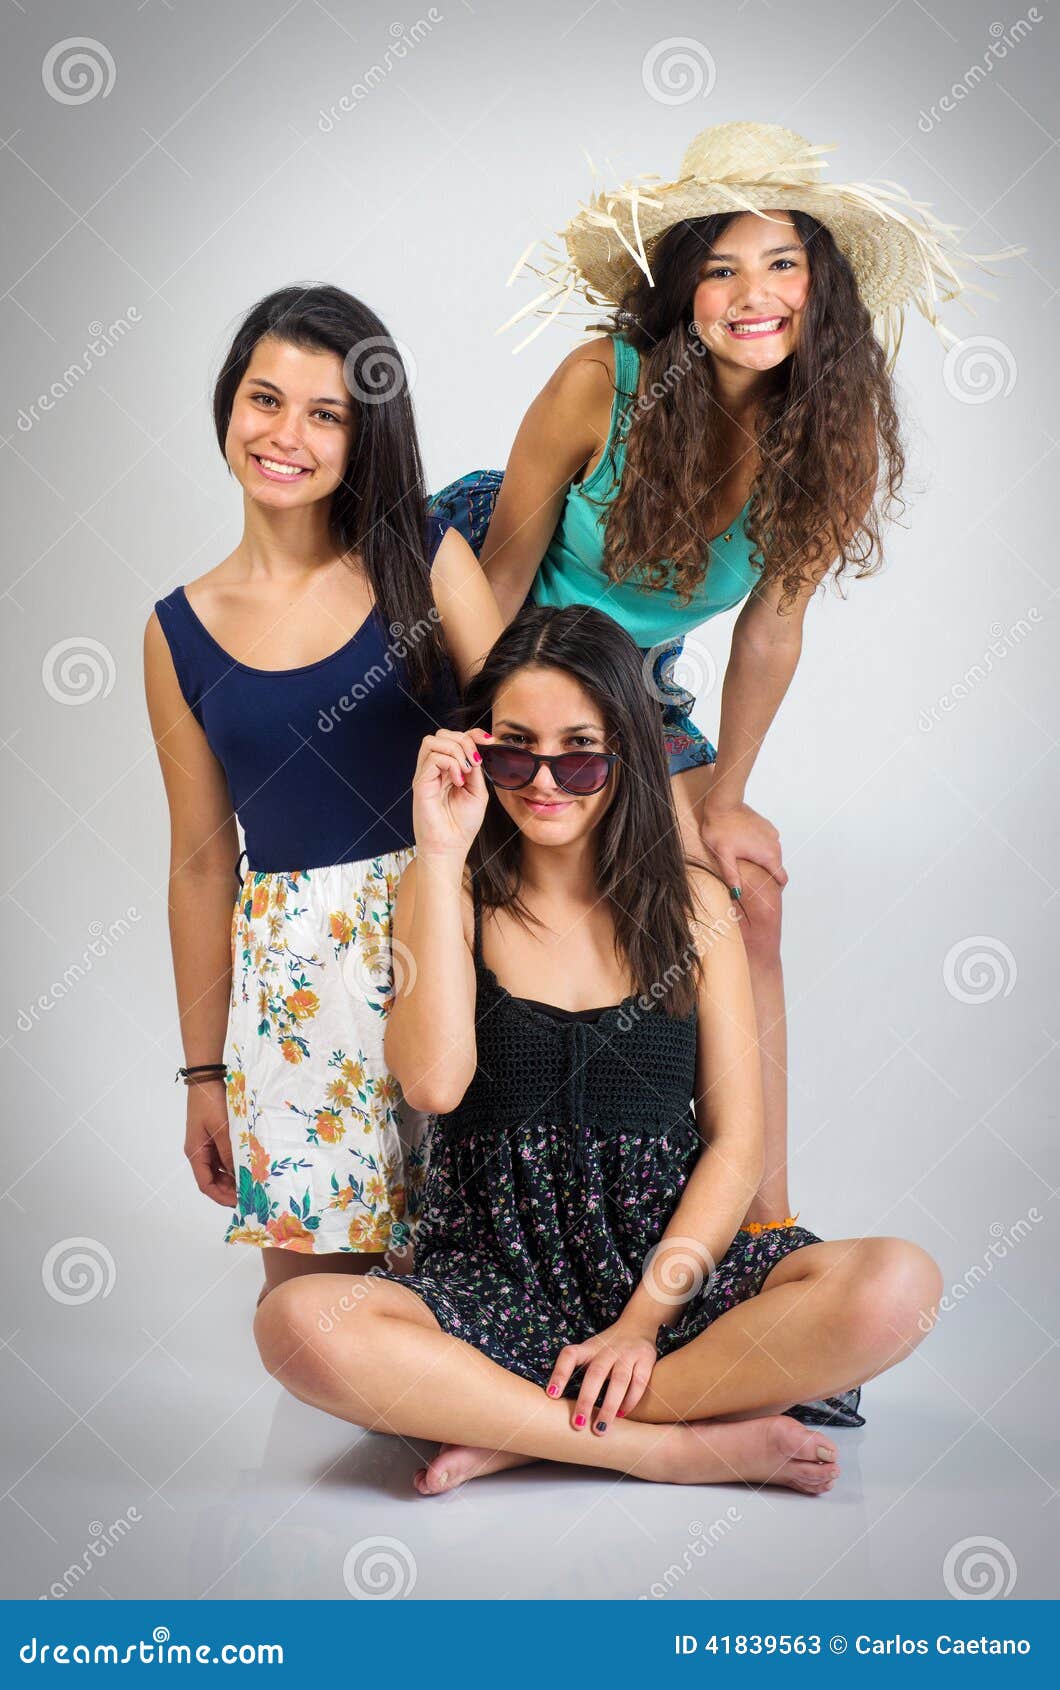 Premium Photo  Three best friends posing in studio wearing summer style  outfit and jeans shorts